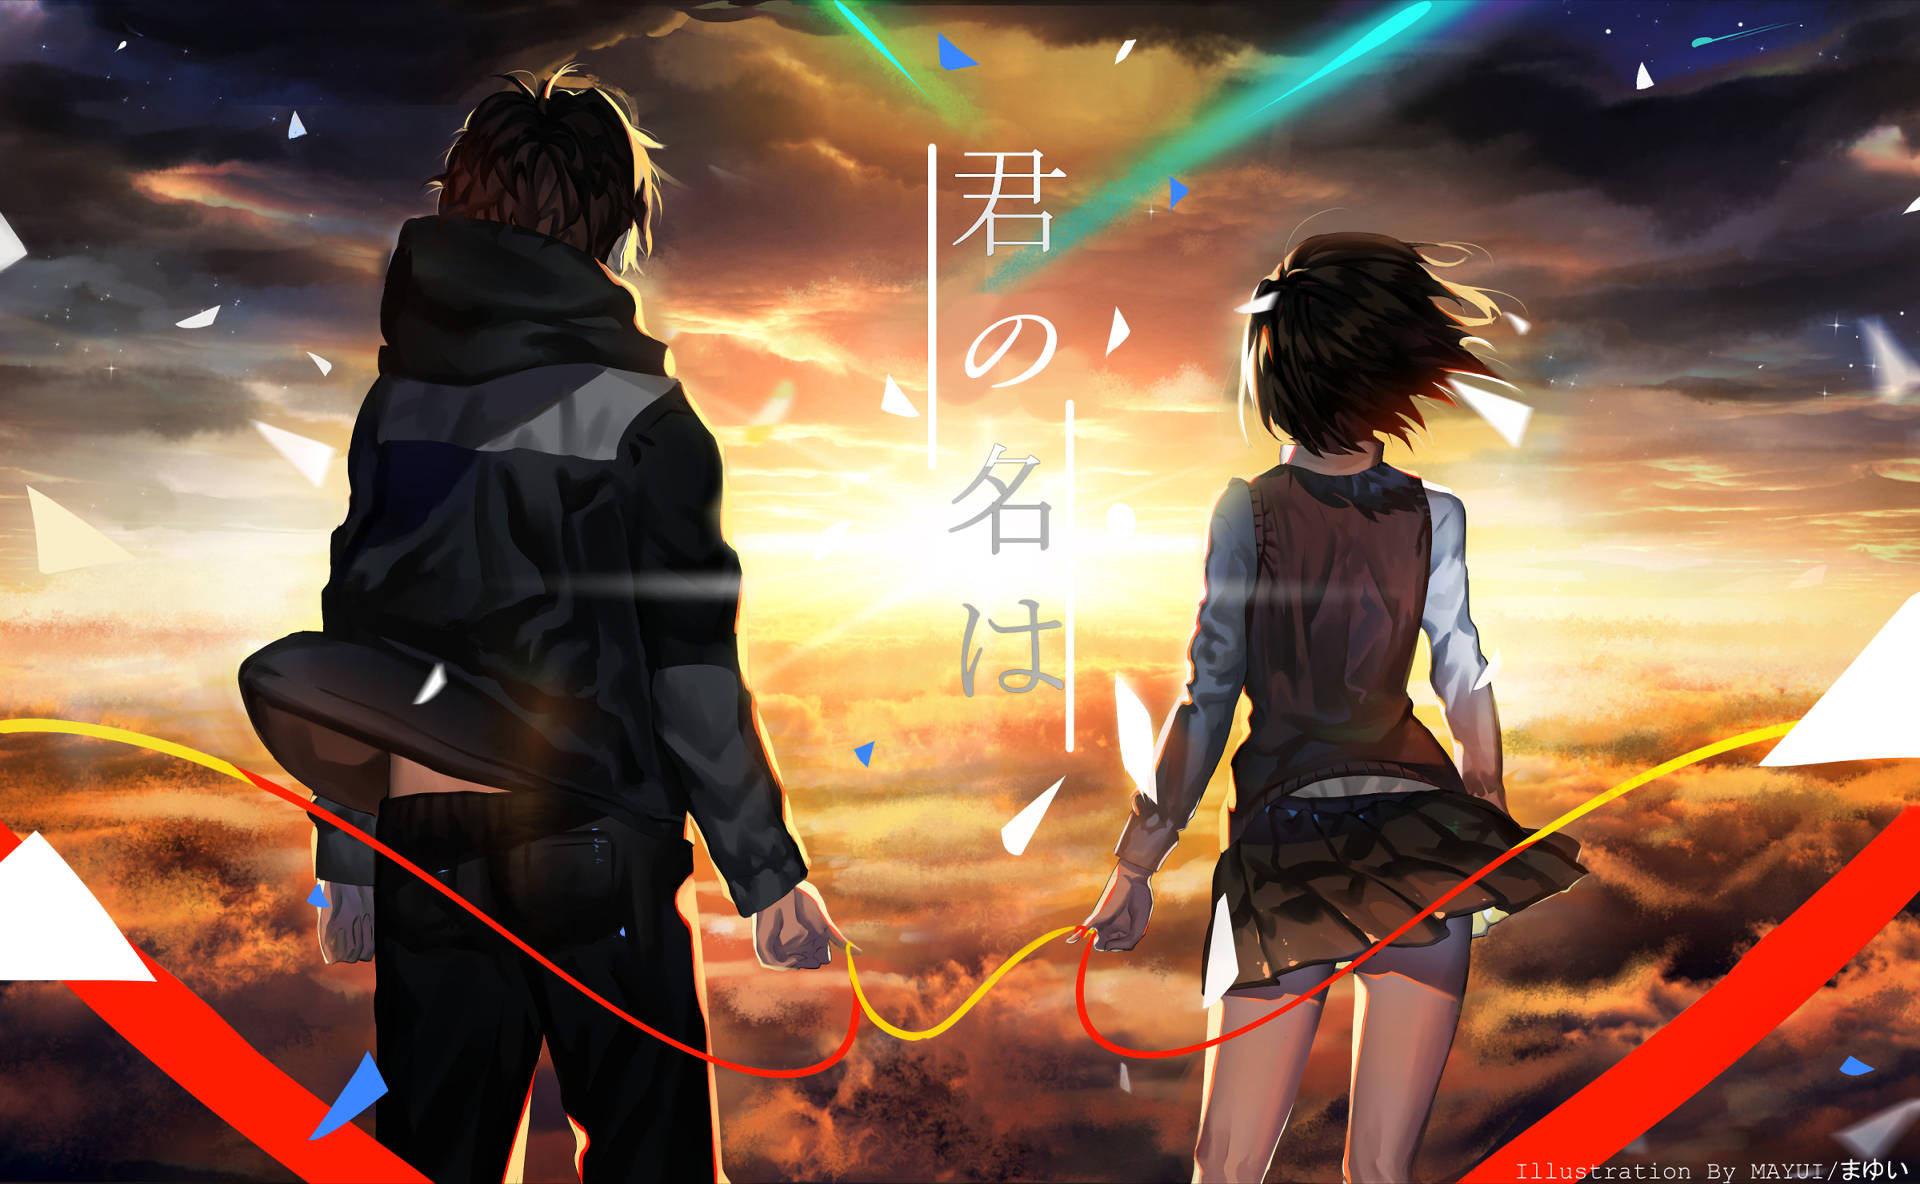 Your Name Anime 2016 Lovers In Sunset Background